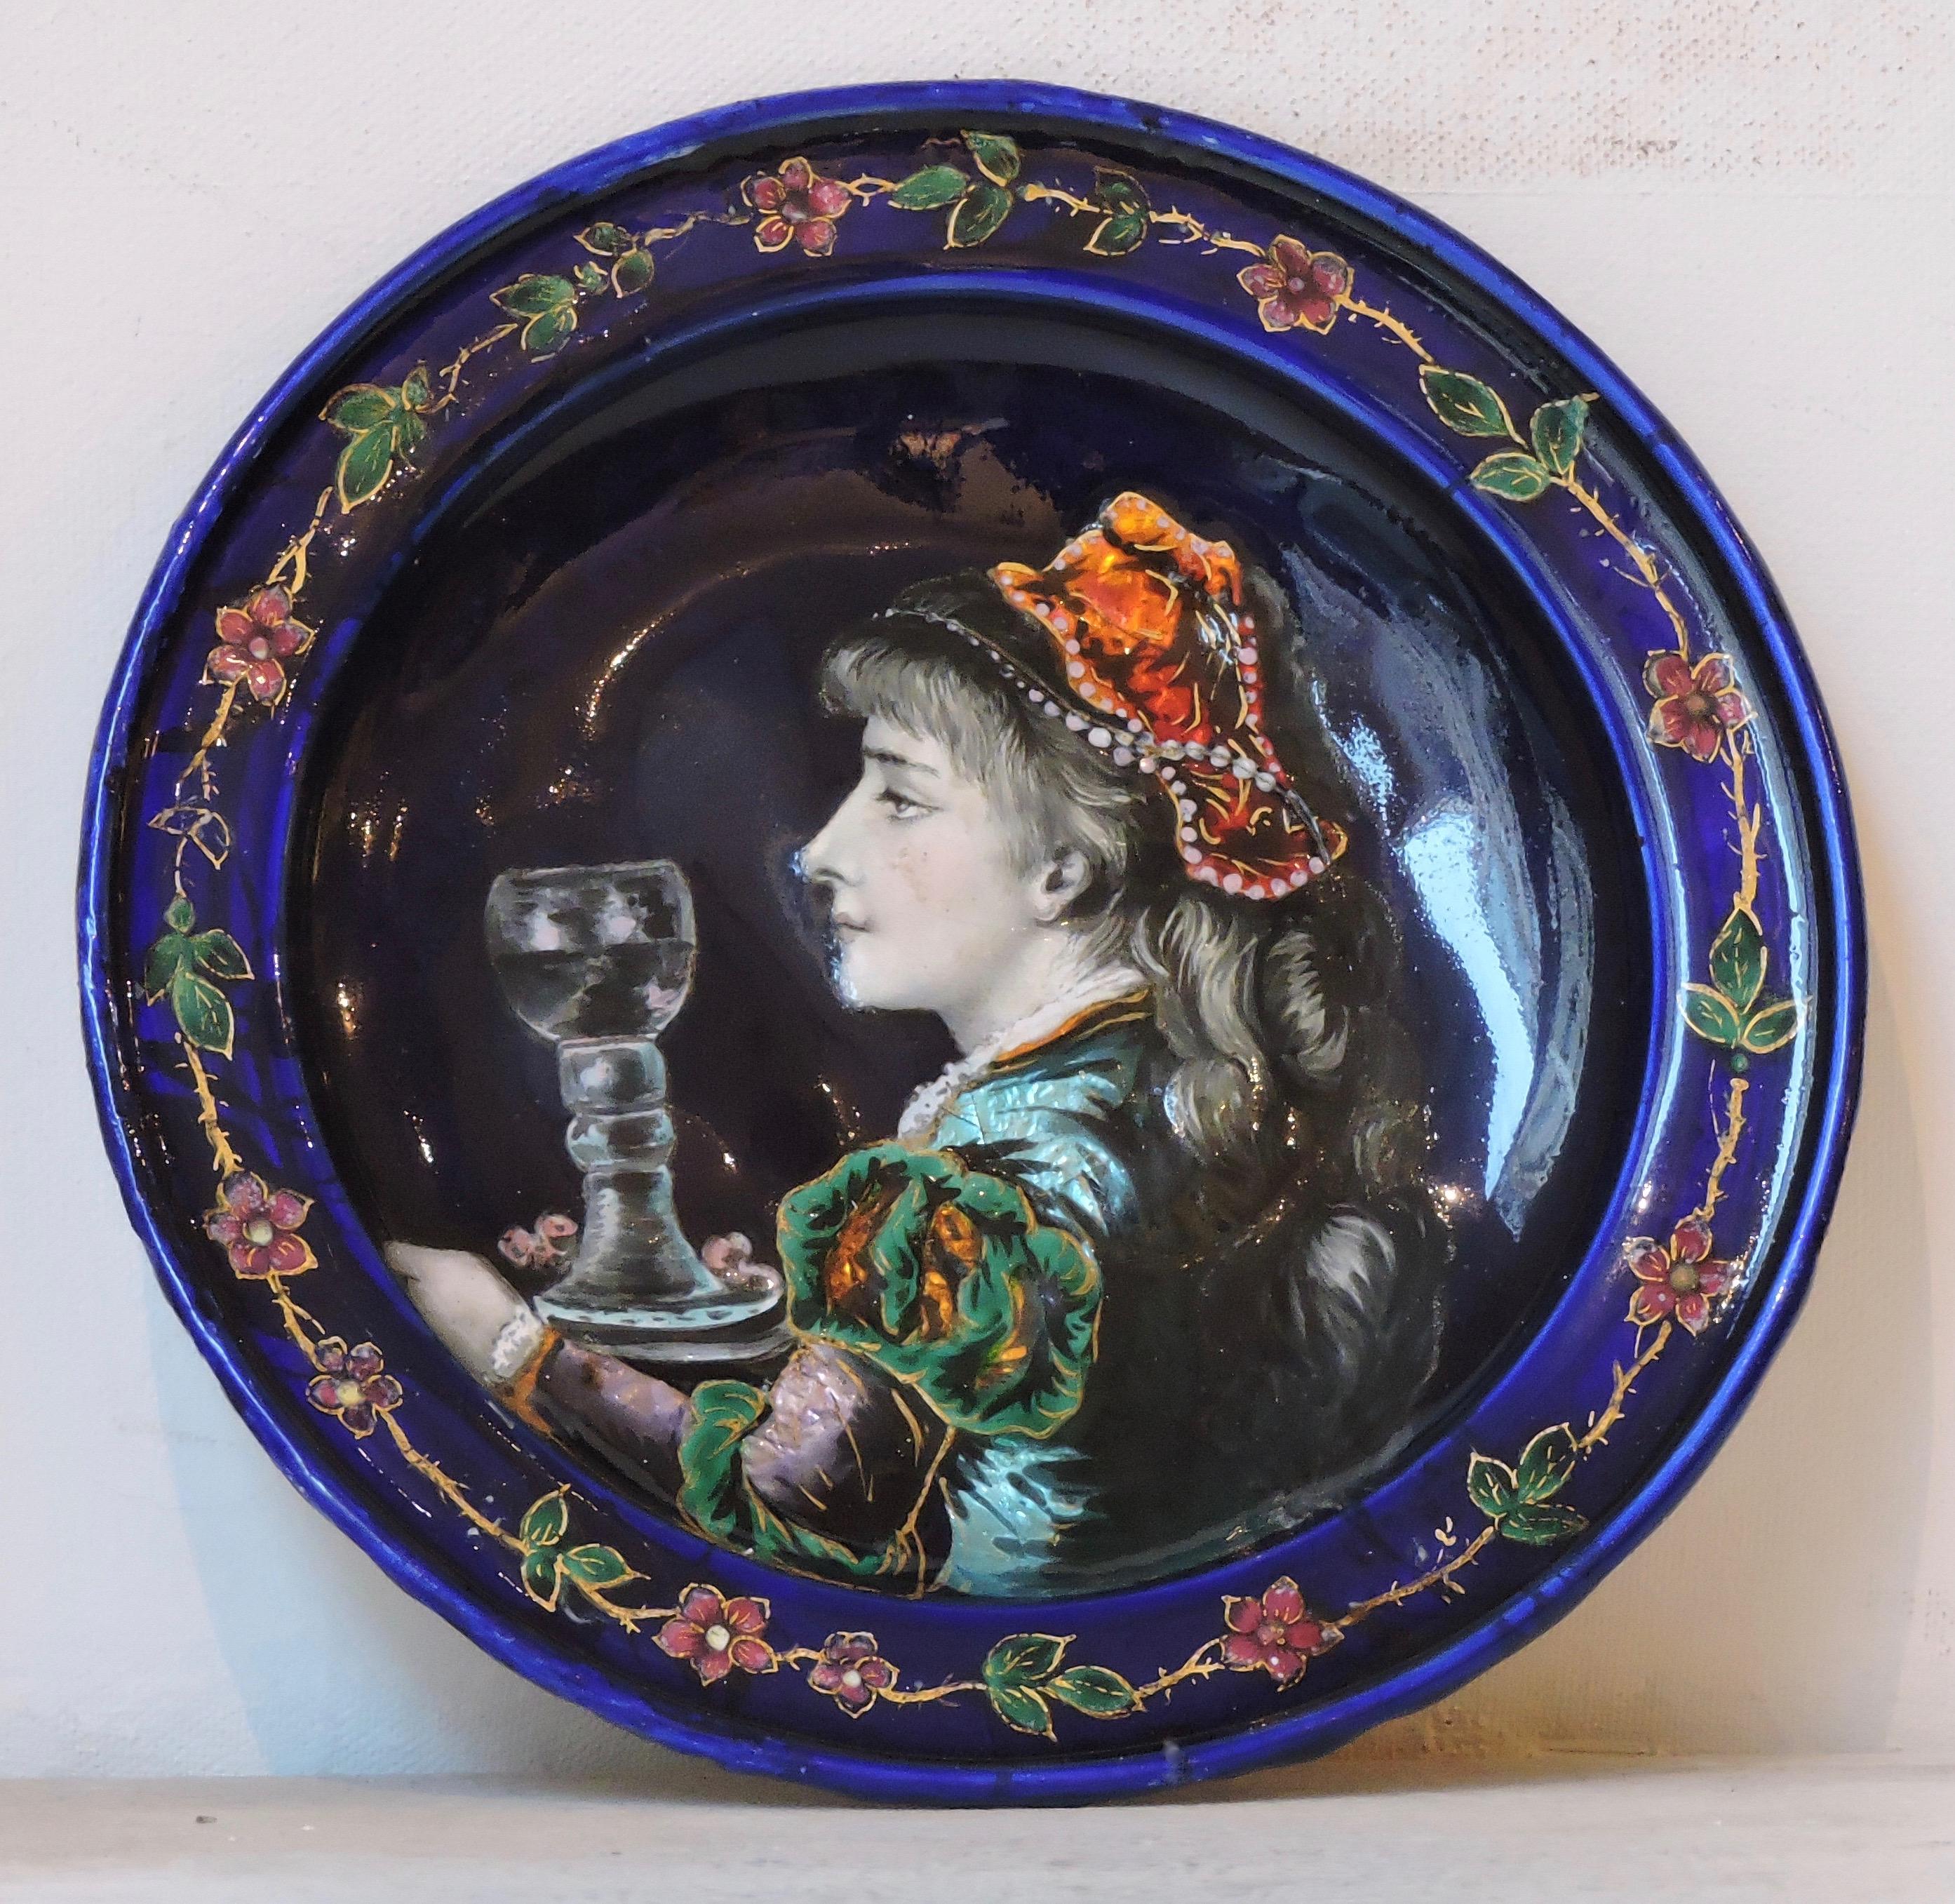 A French 19th century enamel on copper pair of plates, circa 1880
Two polychromed enameled plates representing a Renaissance couple of costumed nobles, 
circa 1880.